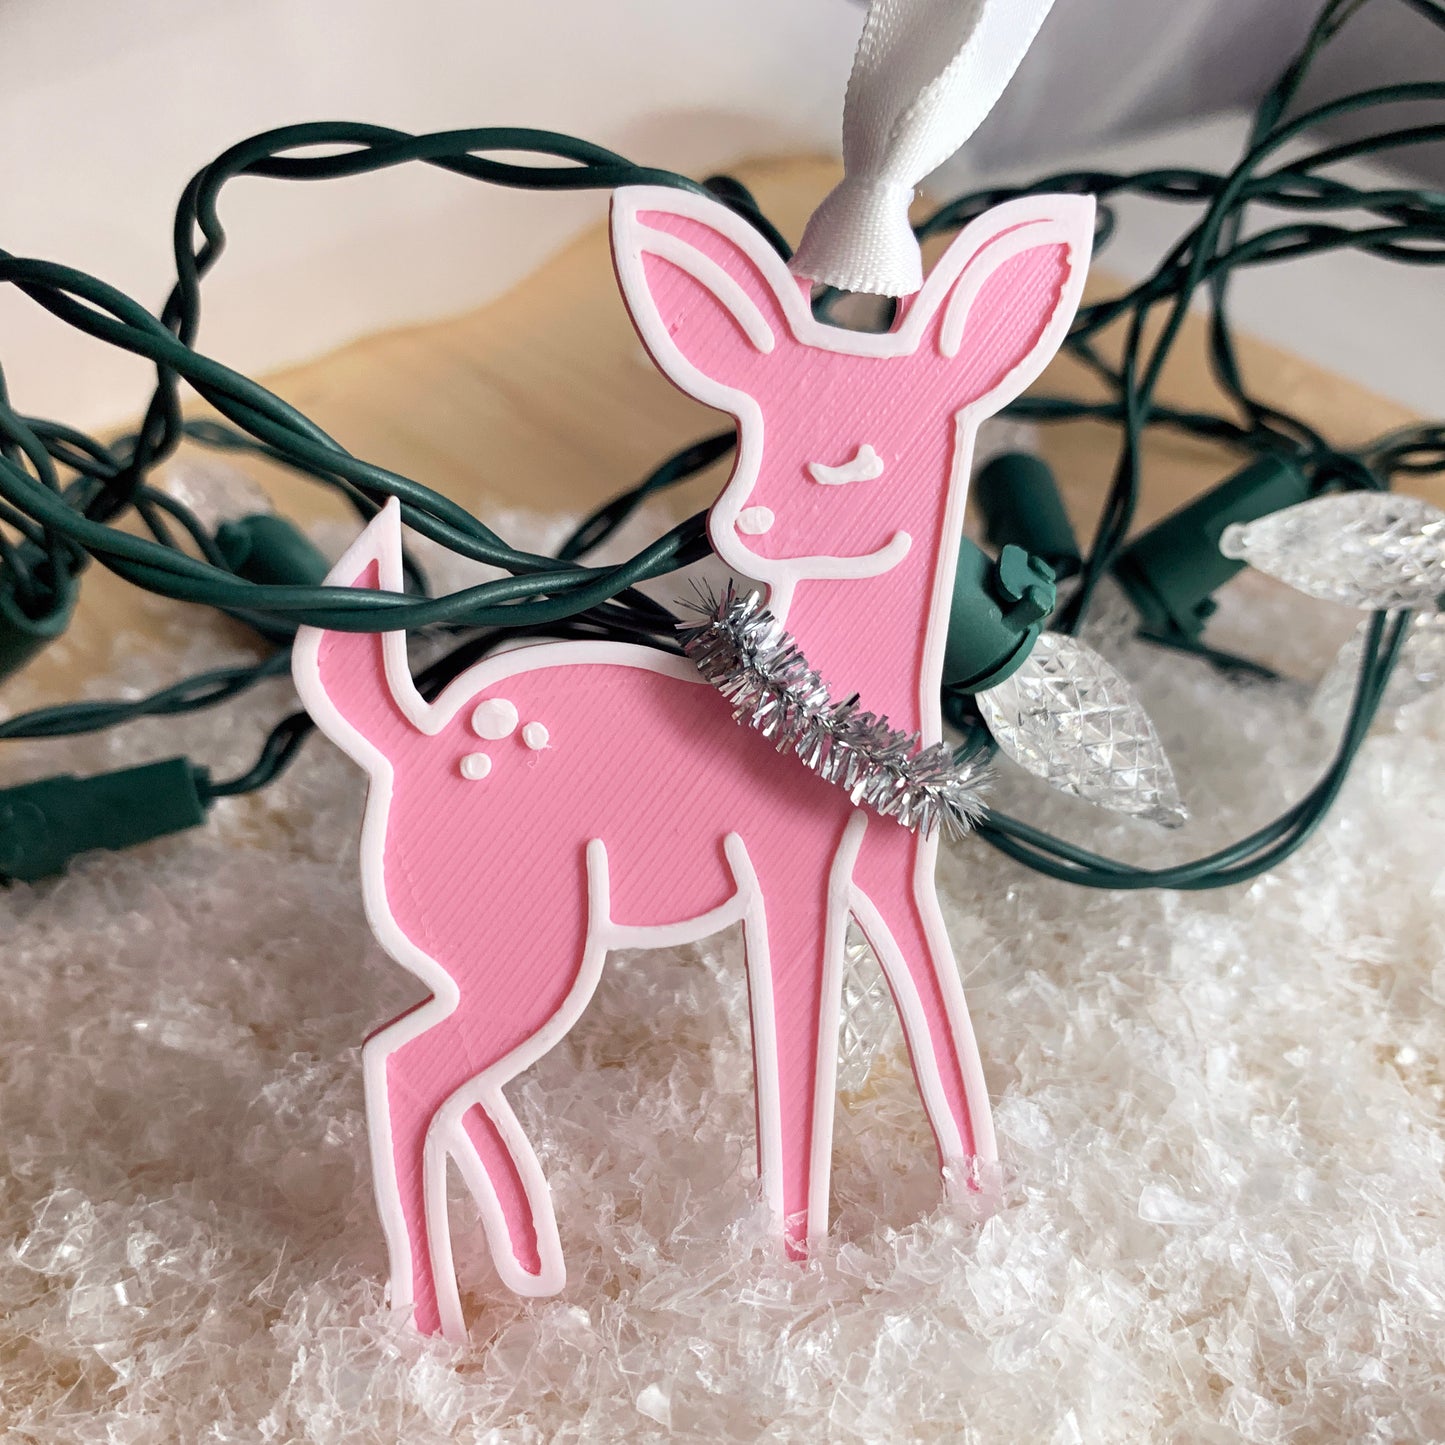 Near and Deer 3D Printed Ornament